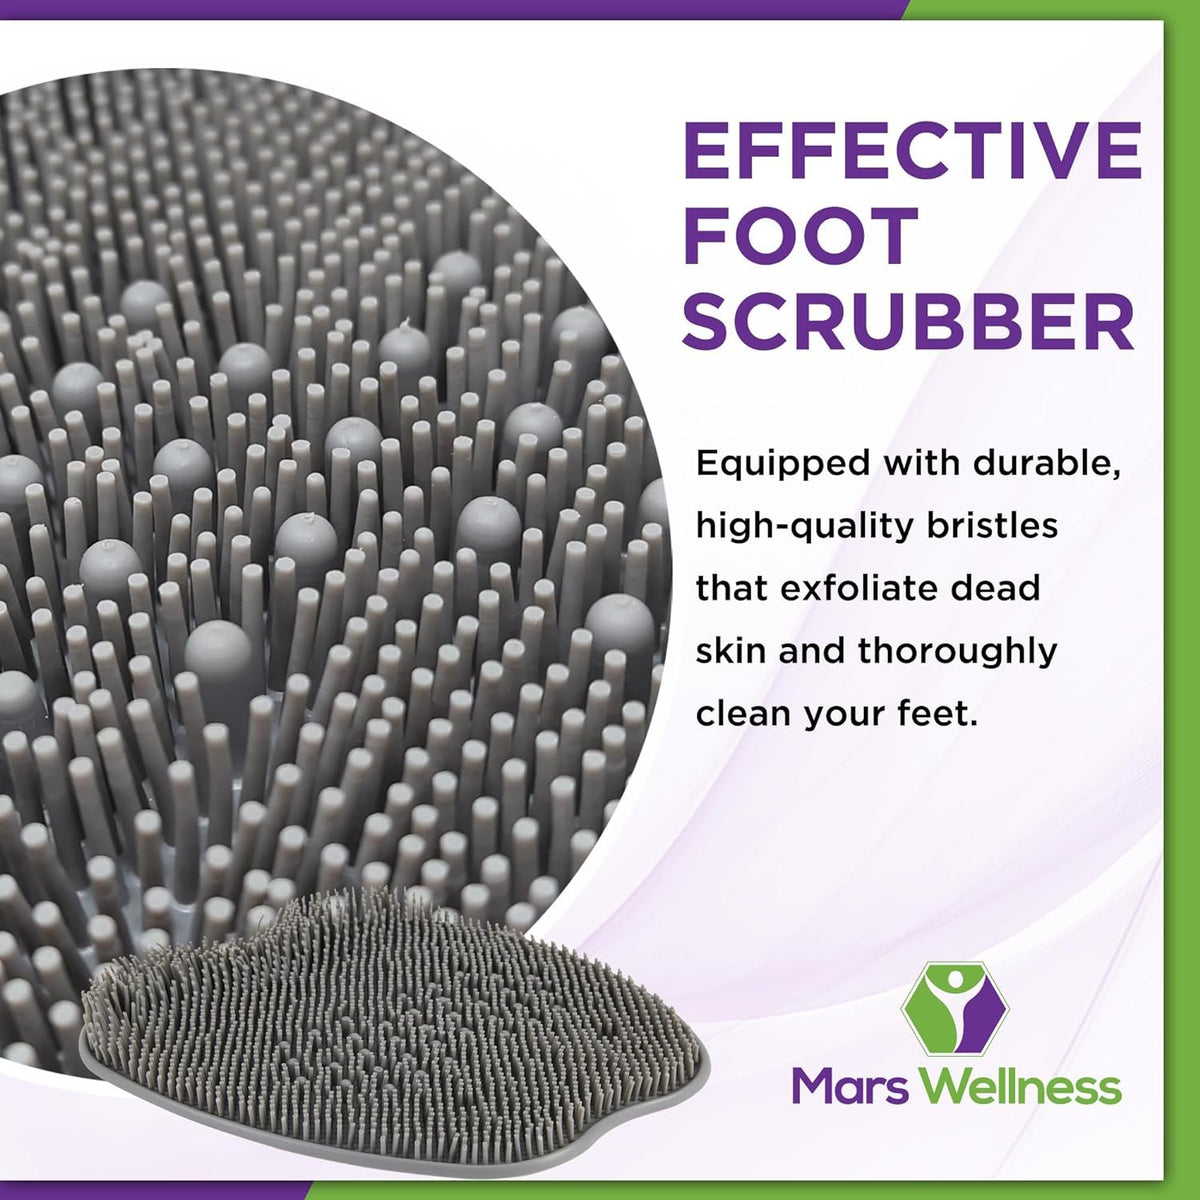 Shower Foot Scrubber and Massager - Foot Scrubber in Shower - Suction Foot Scrubber - Cleaner and Massager Mat - Improves Circulation - Easy to Store - Gray